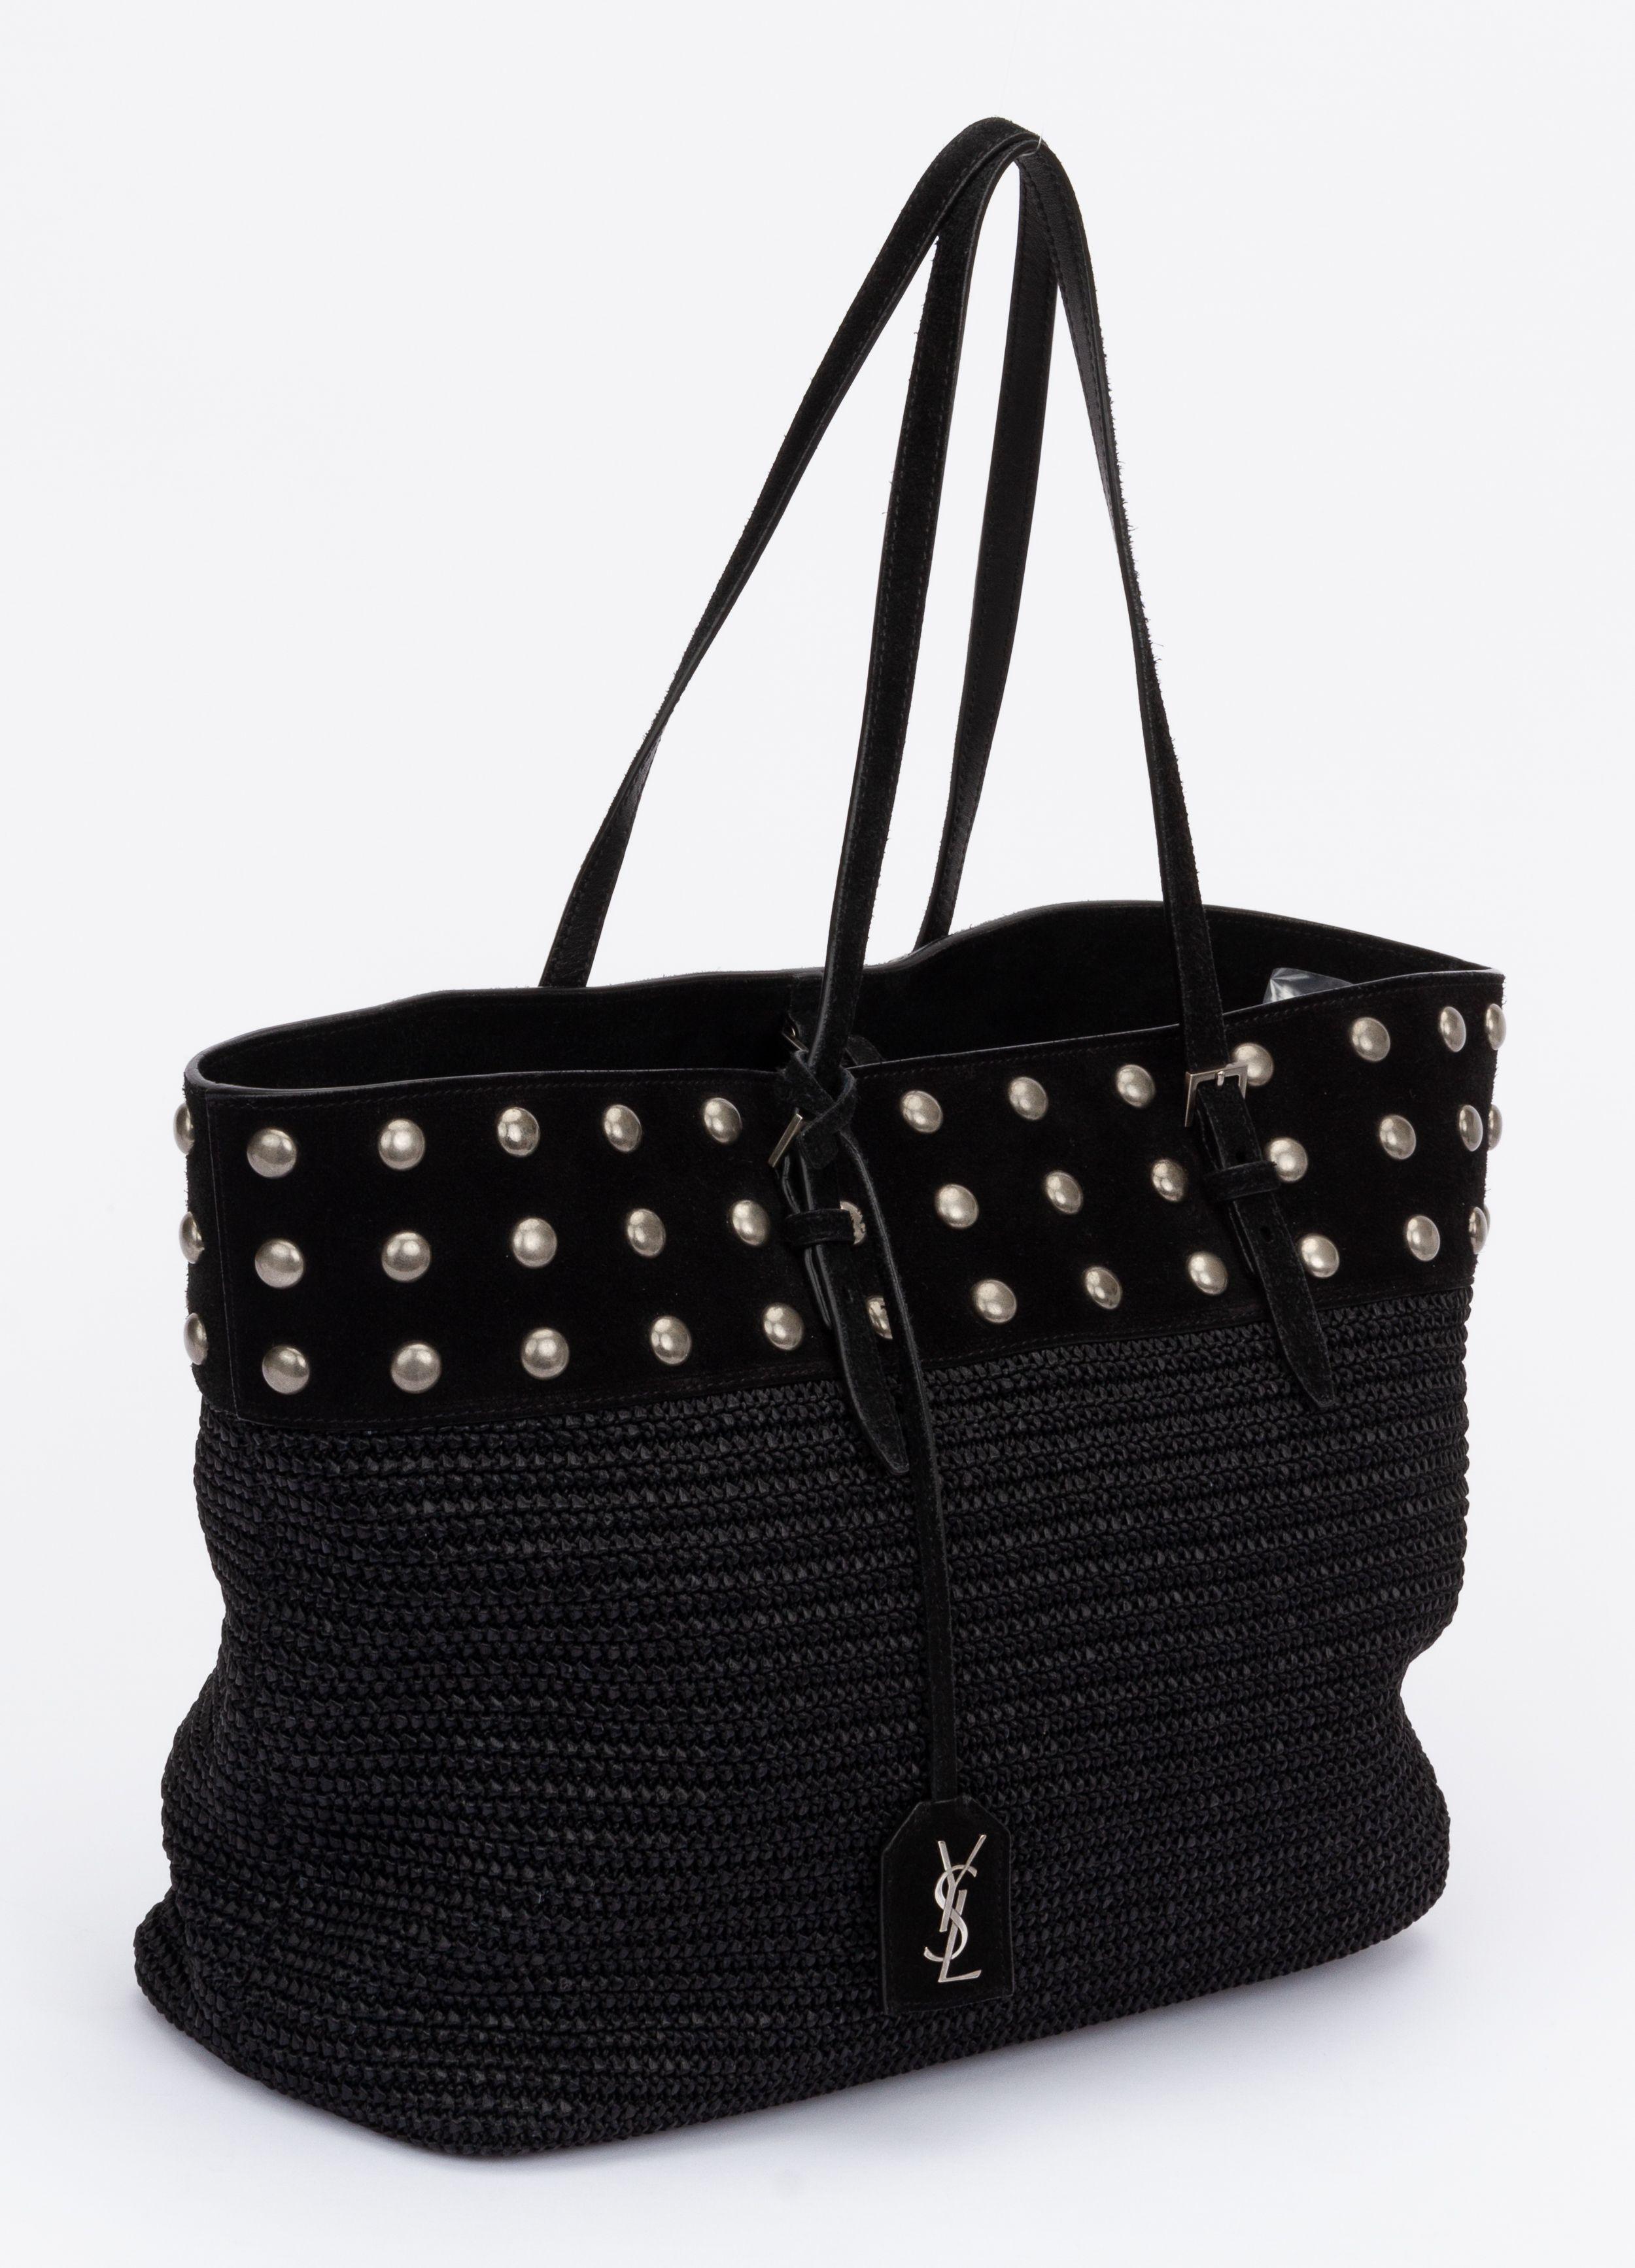 Yves Saint Laurent tote in black crafted of wicker. Perfect piece for the beach or an everyday bag. The bottom half of the bag is black wicker while the top half is decorated with studs in silver hardware. It has to handles (8.5